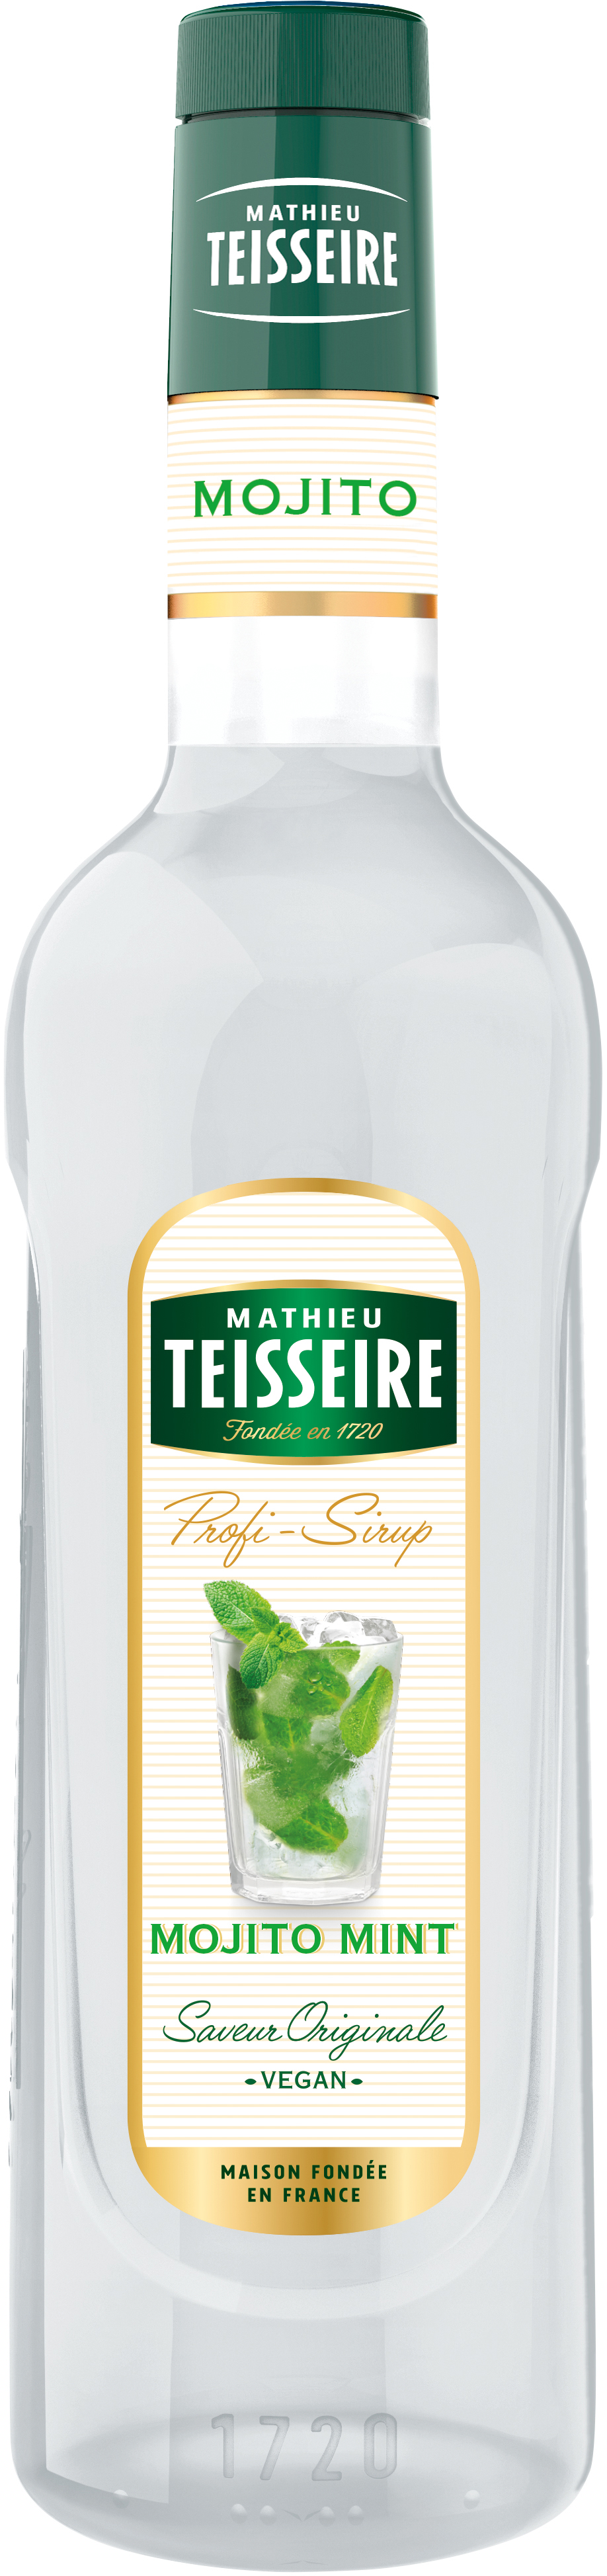 Teisseire Mojito Mint Sirup - 0,7L